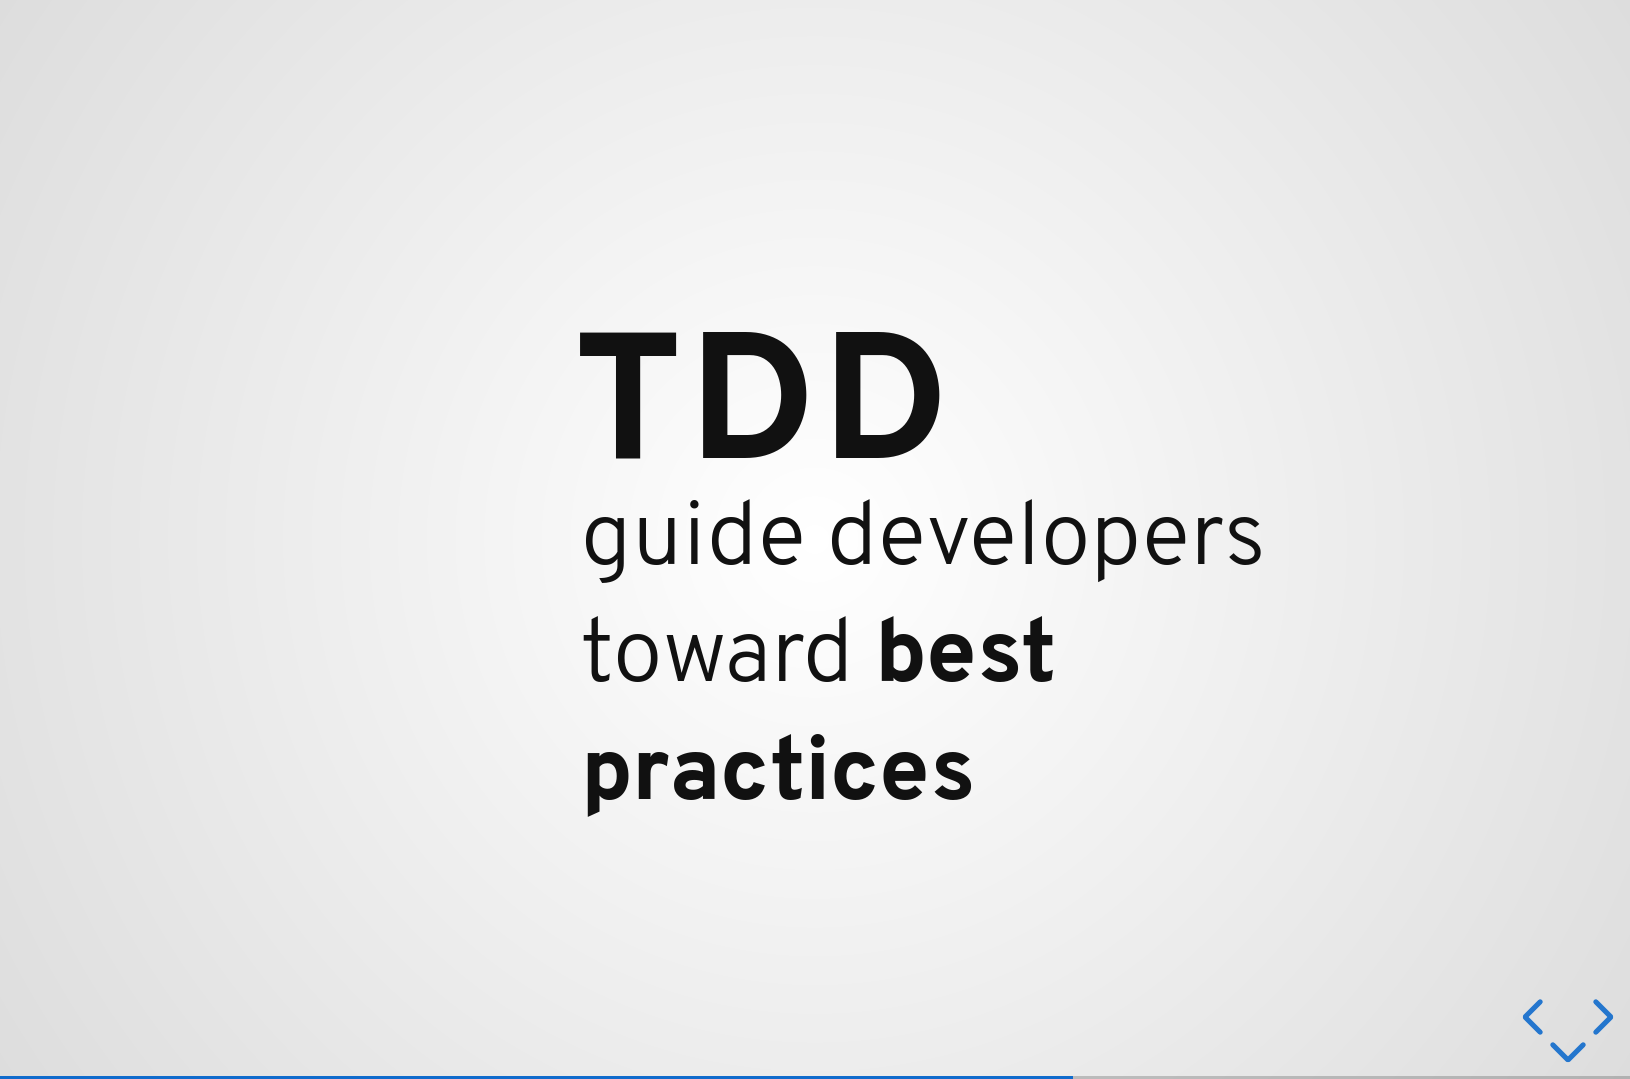 TDD Guides you in right
direction